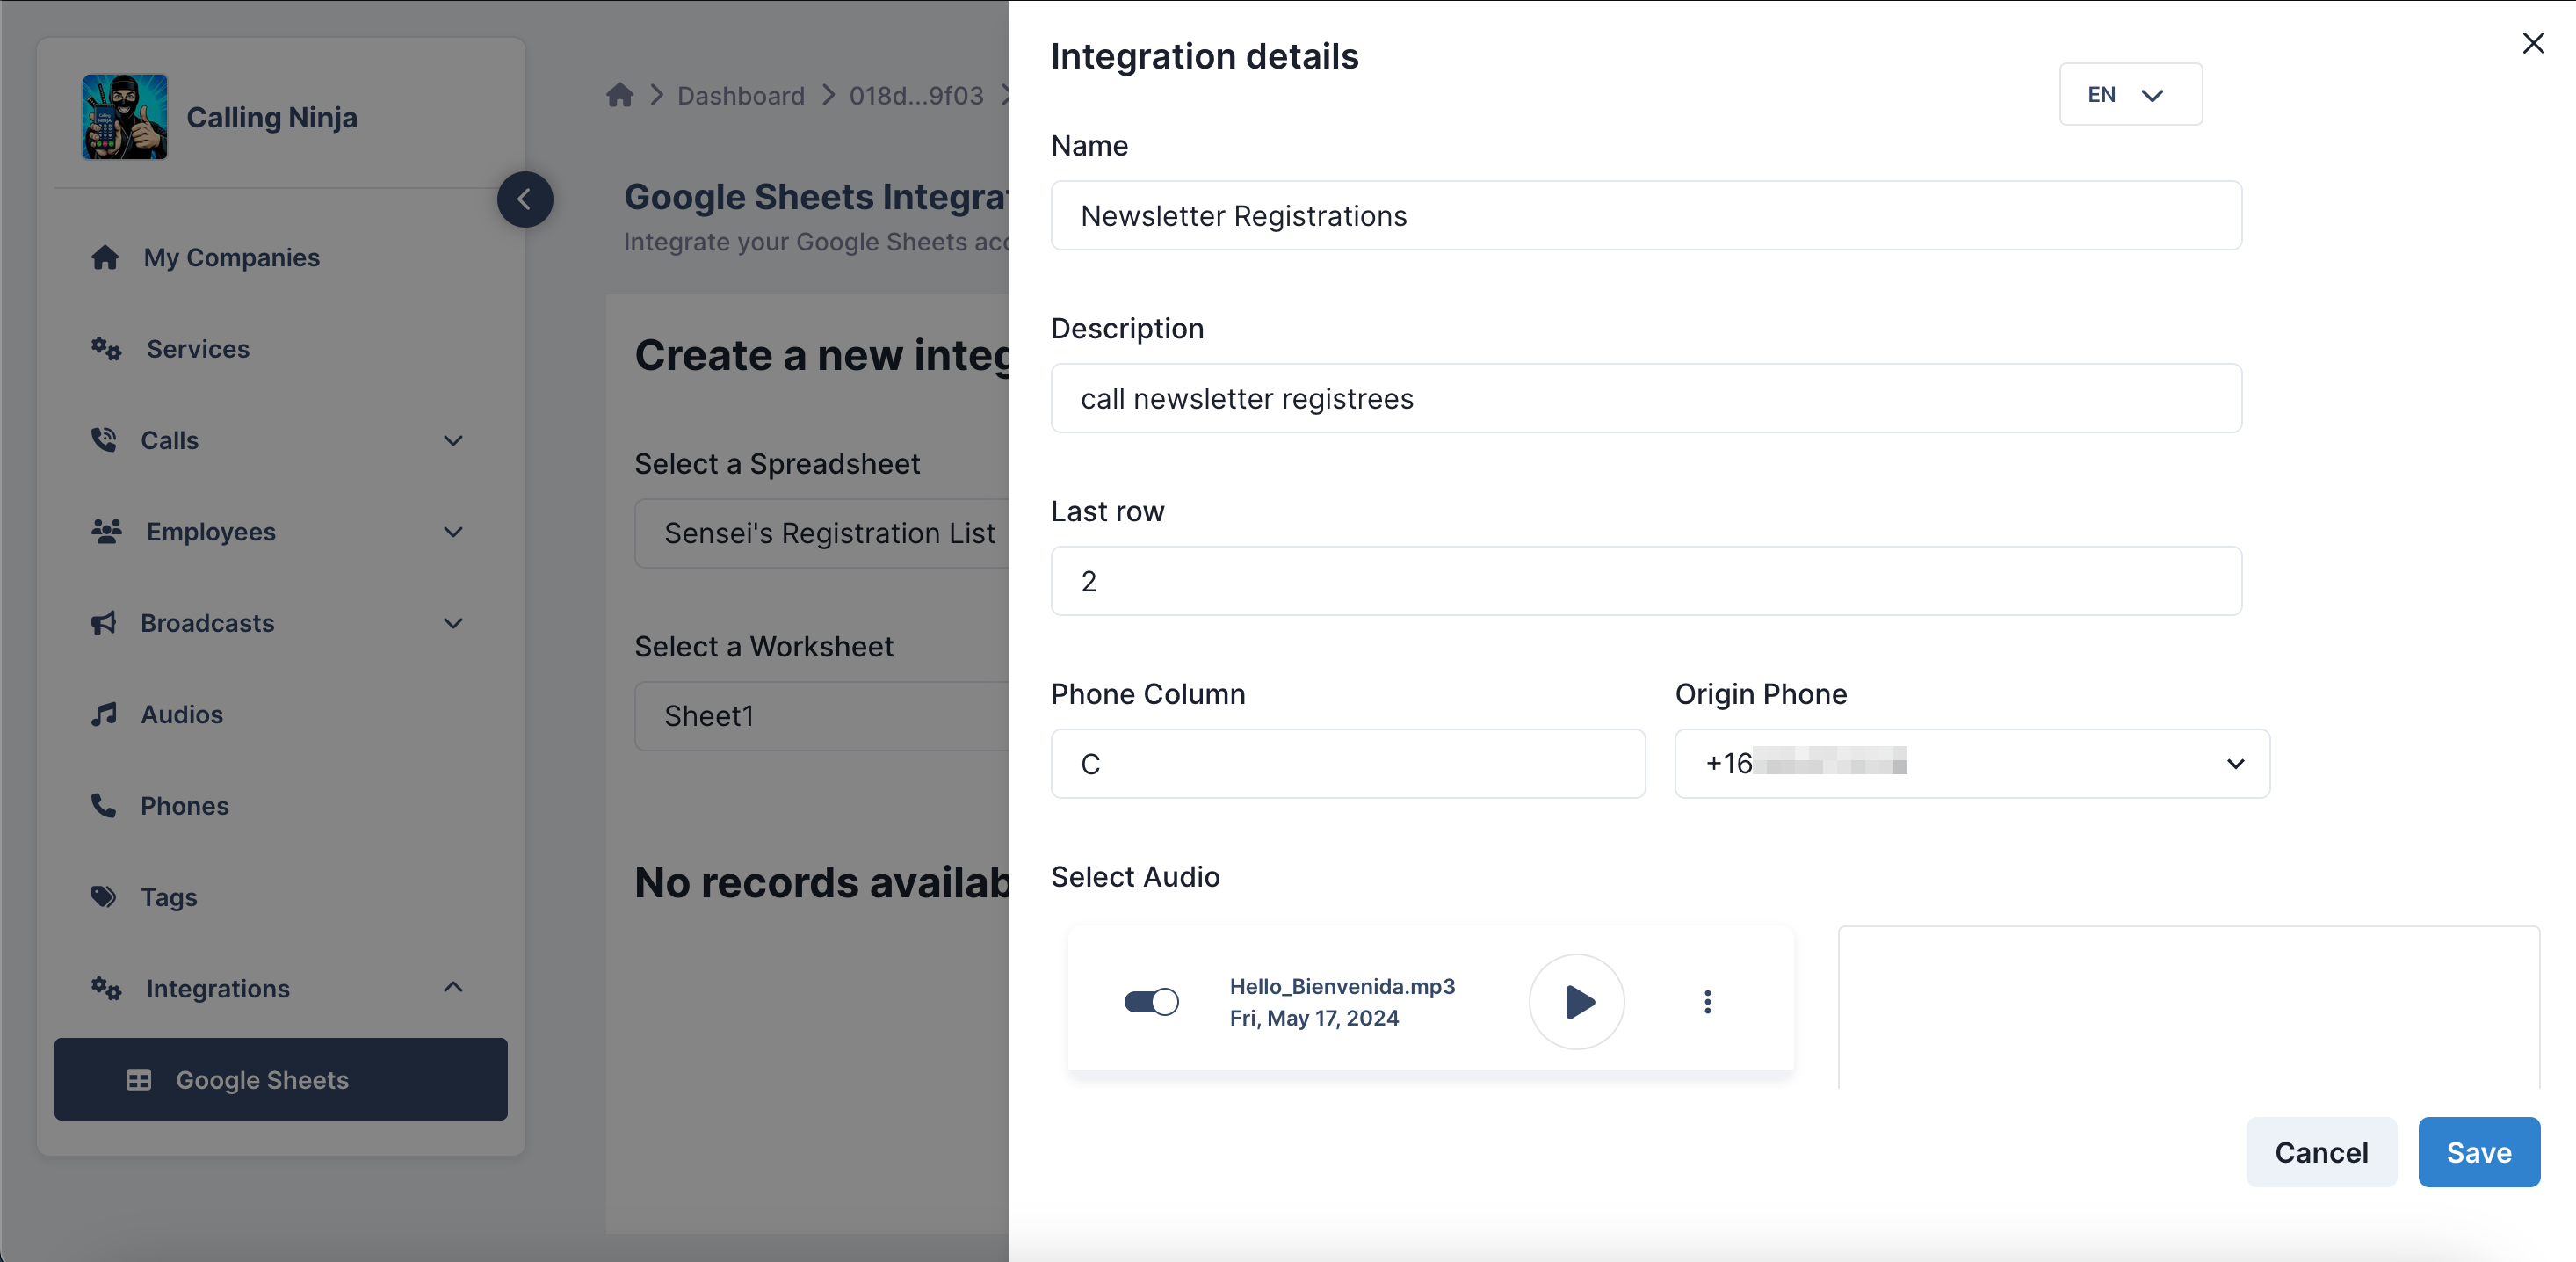 How to fill out the form for integration creation